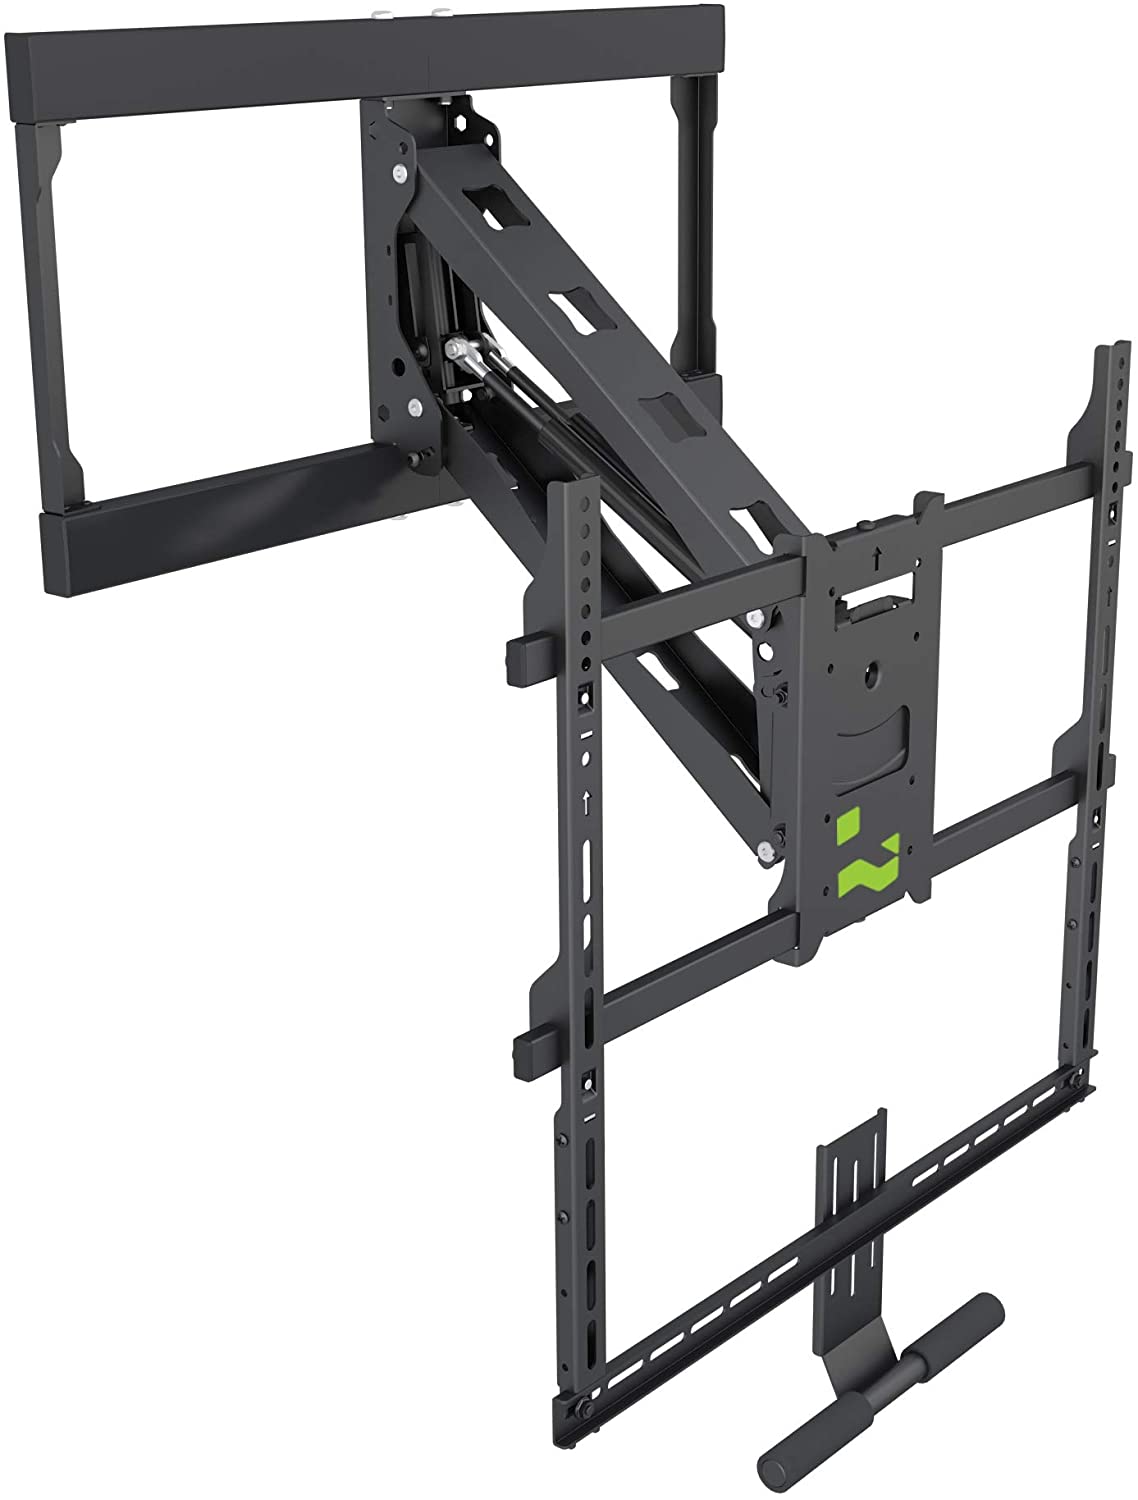 64-1156 Pull Down Fireplace TV Mount Bracket for 42 inches to 65 inches Flat Screen TVs